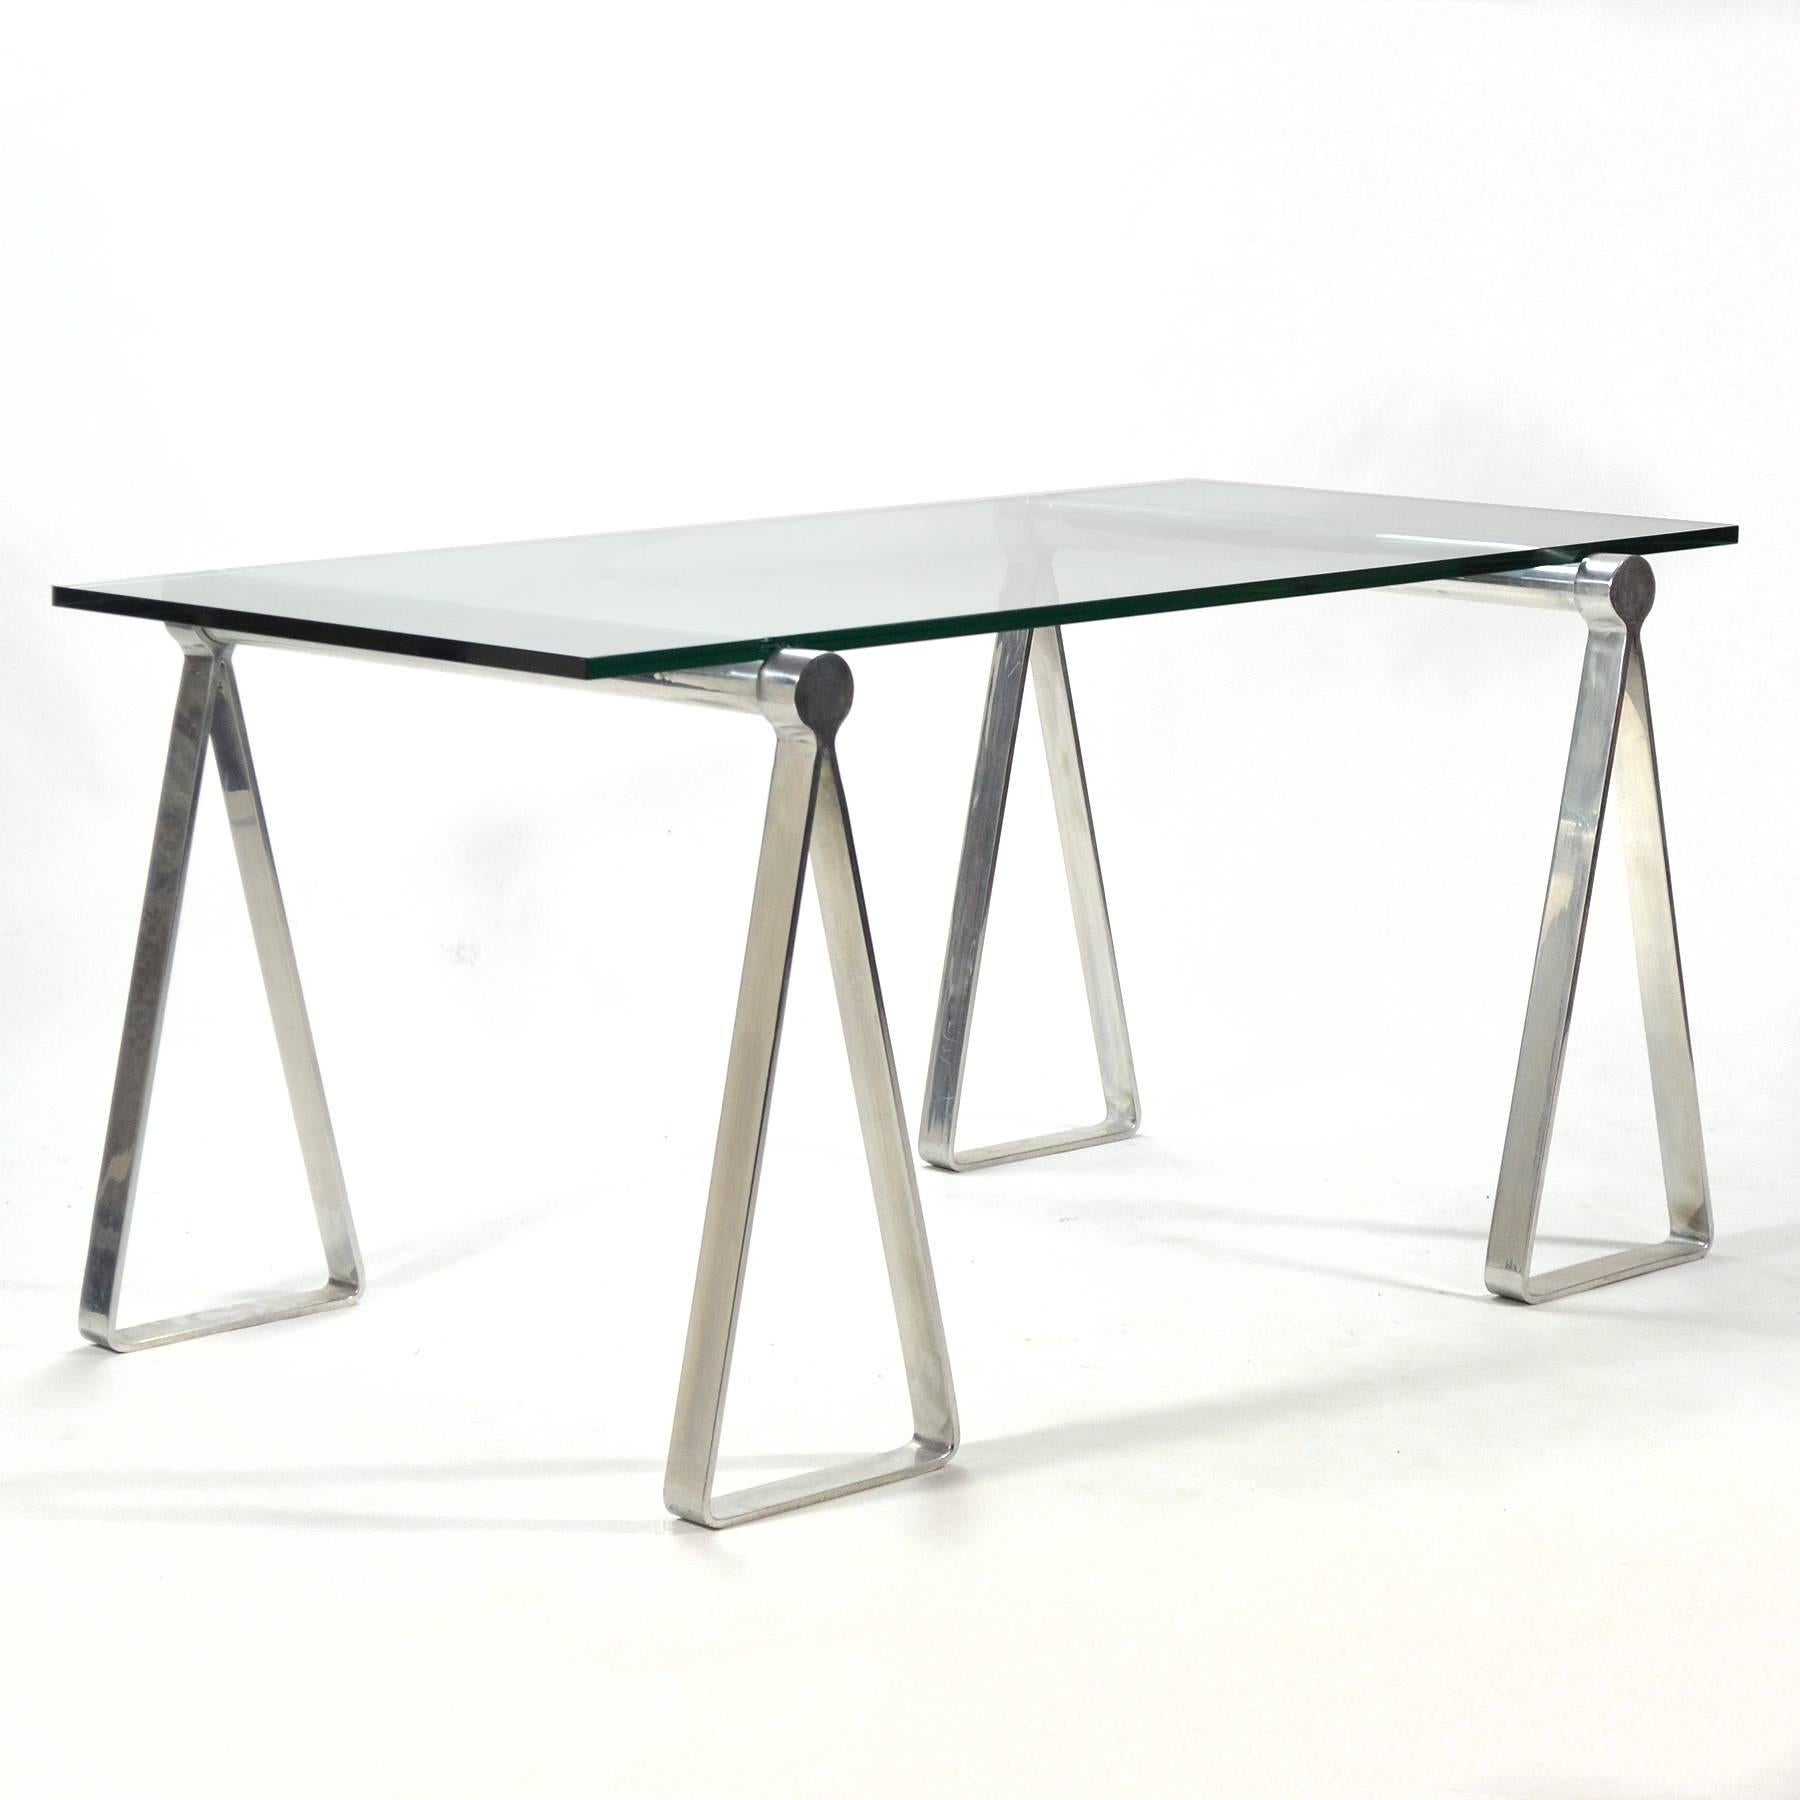 An ingenious and attractive design. Two Campaign-style aluminum sawhorse forms support a glass top creating a wonderful desk or table. The original glass shows damage– ordering a new glass top saves on shipping cost and allows you to select the